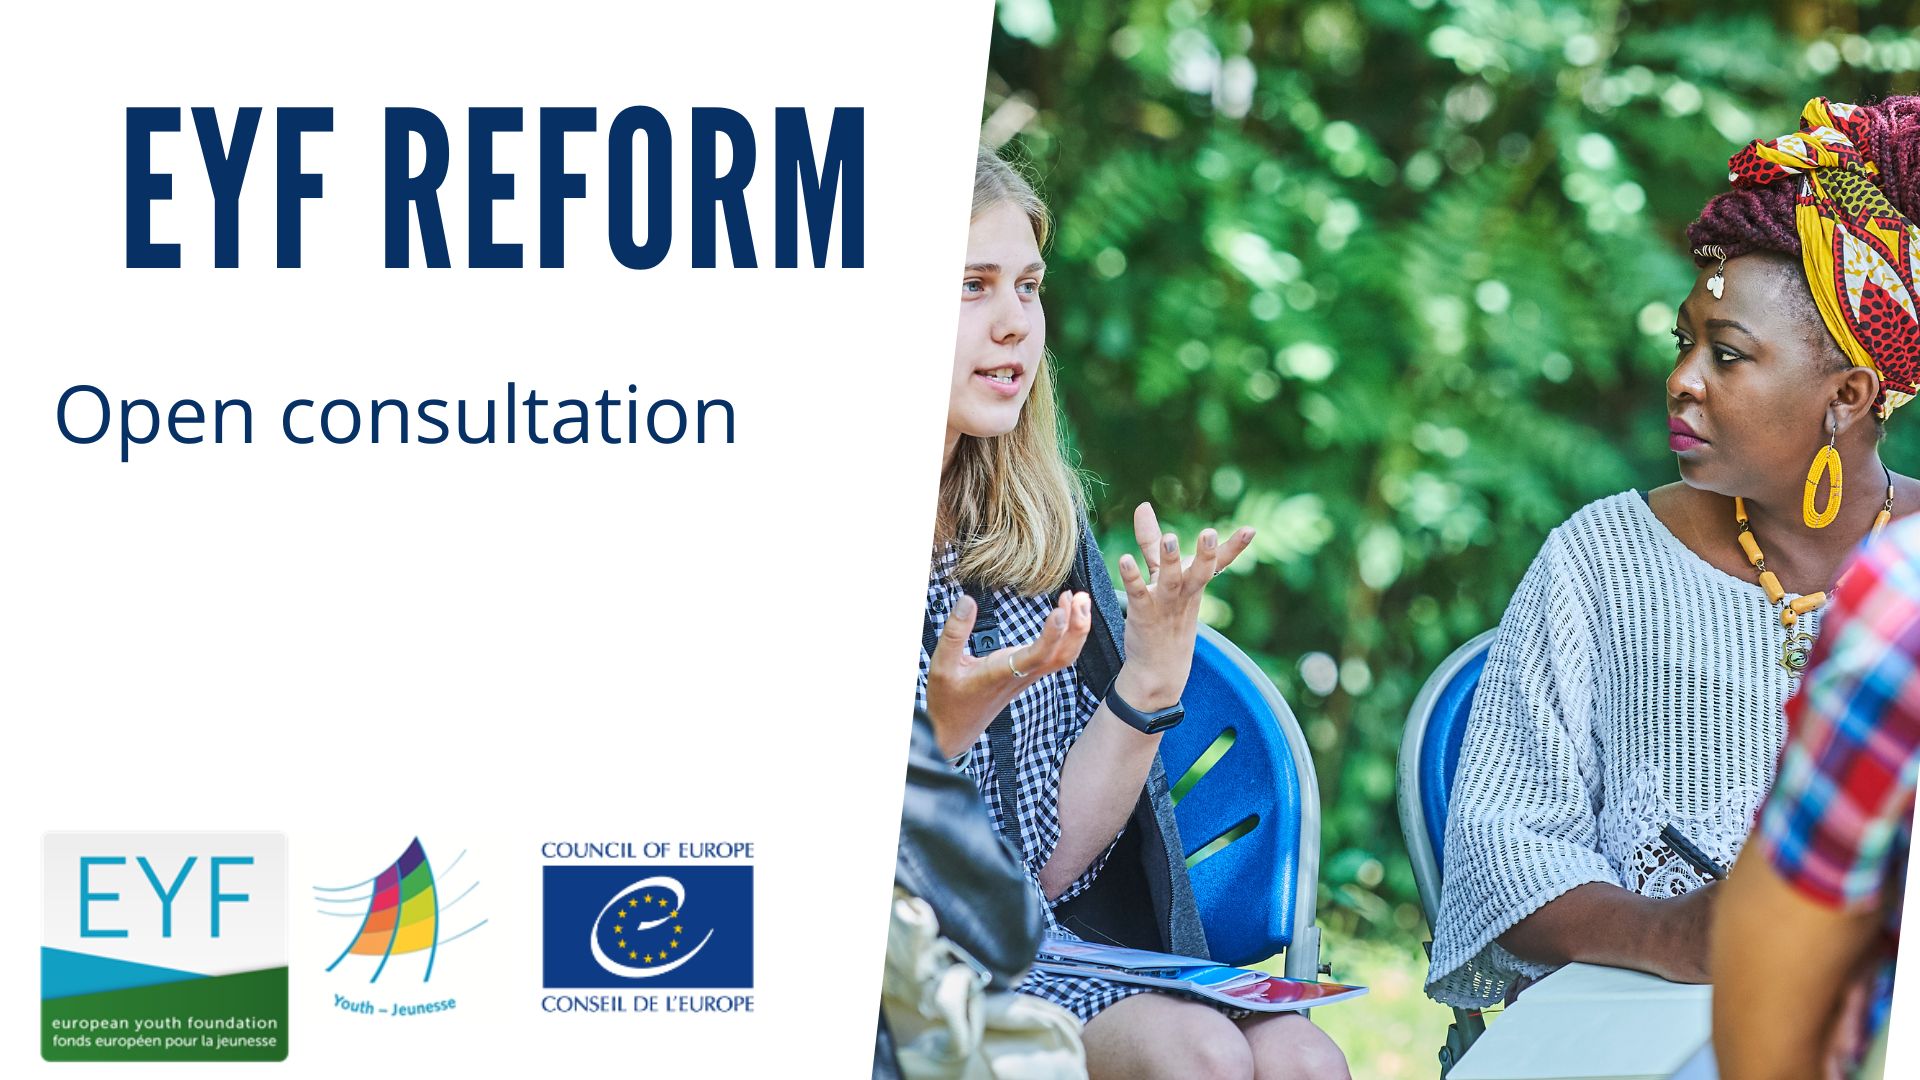 Open consultation on the grants of the European Youth Foundation of the Council of Europe